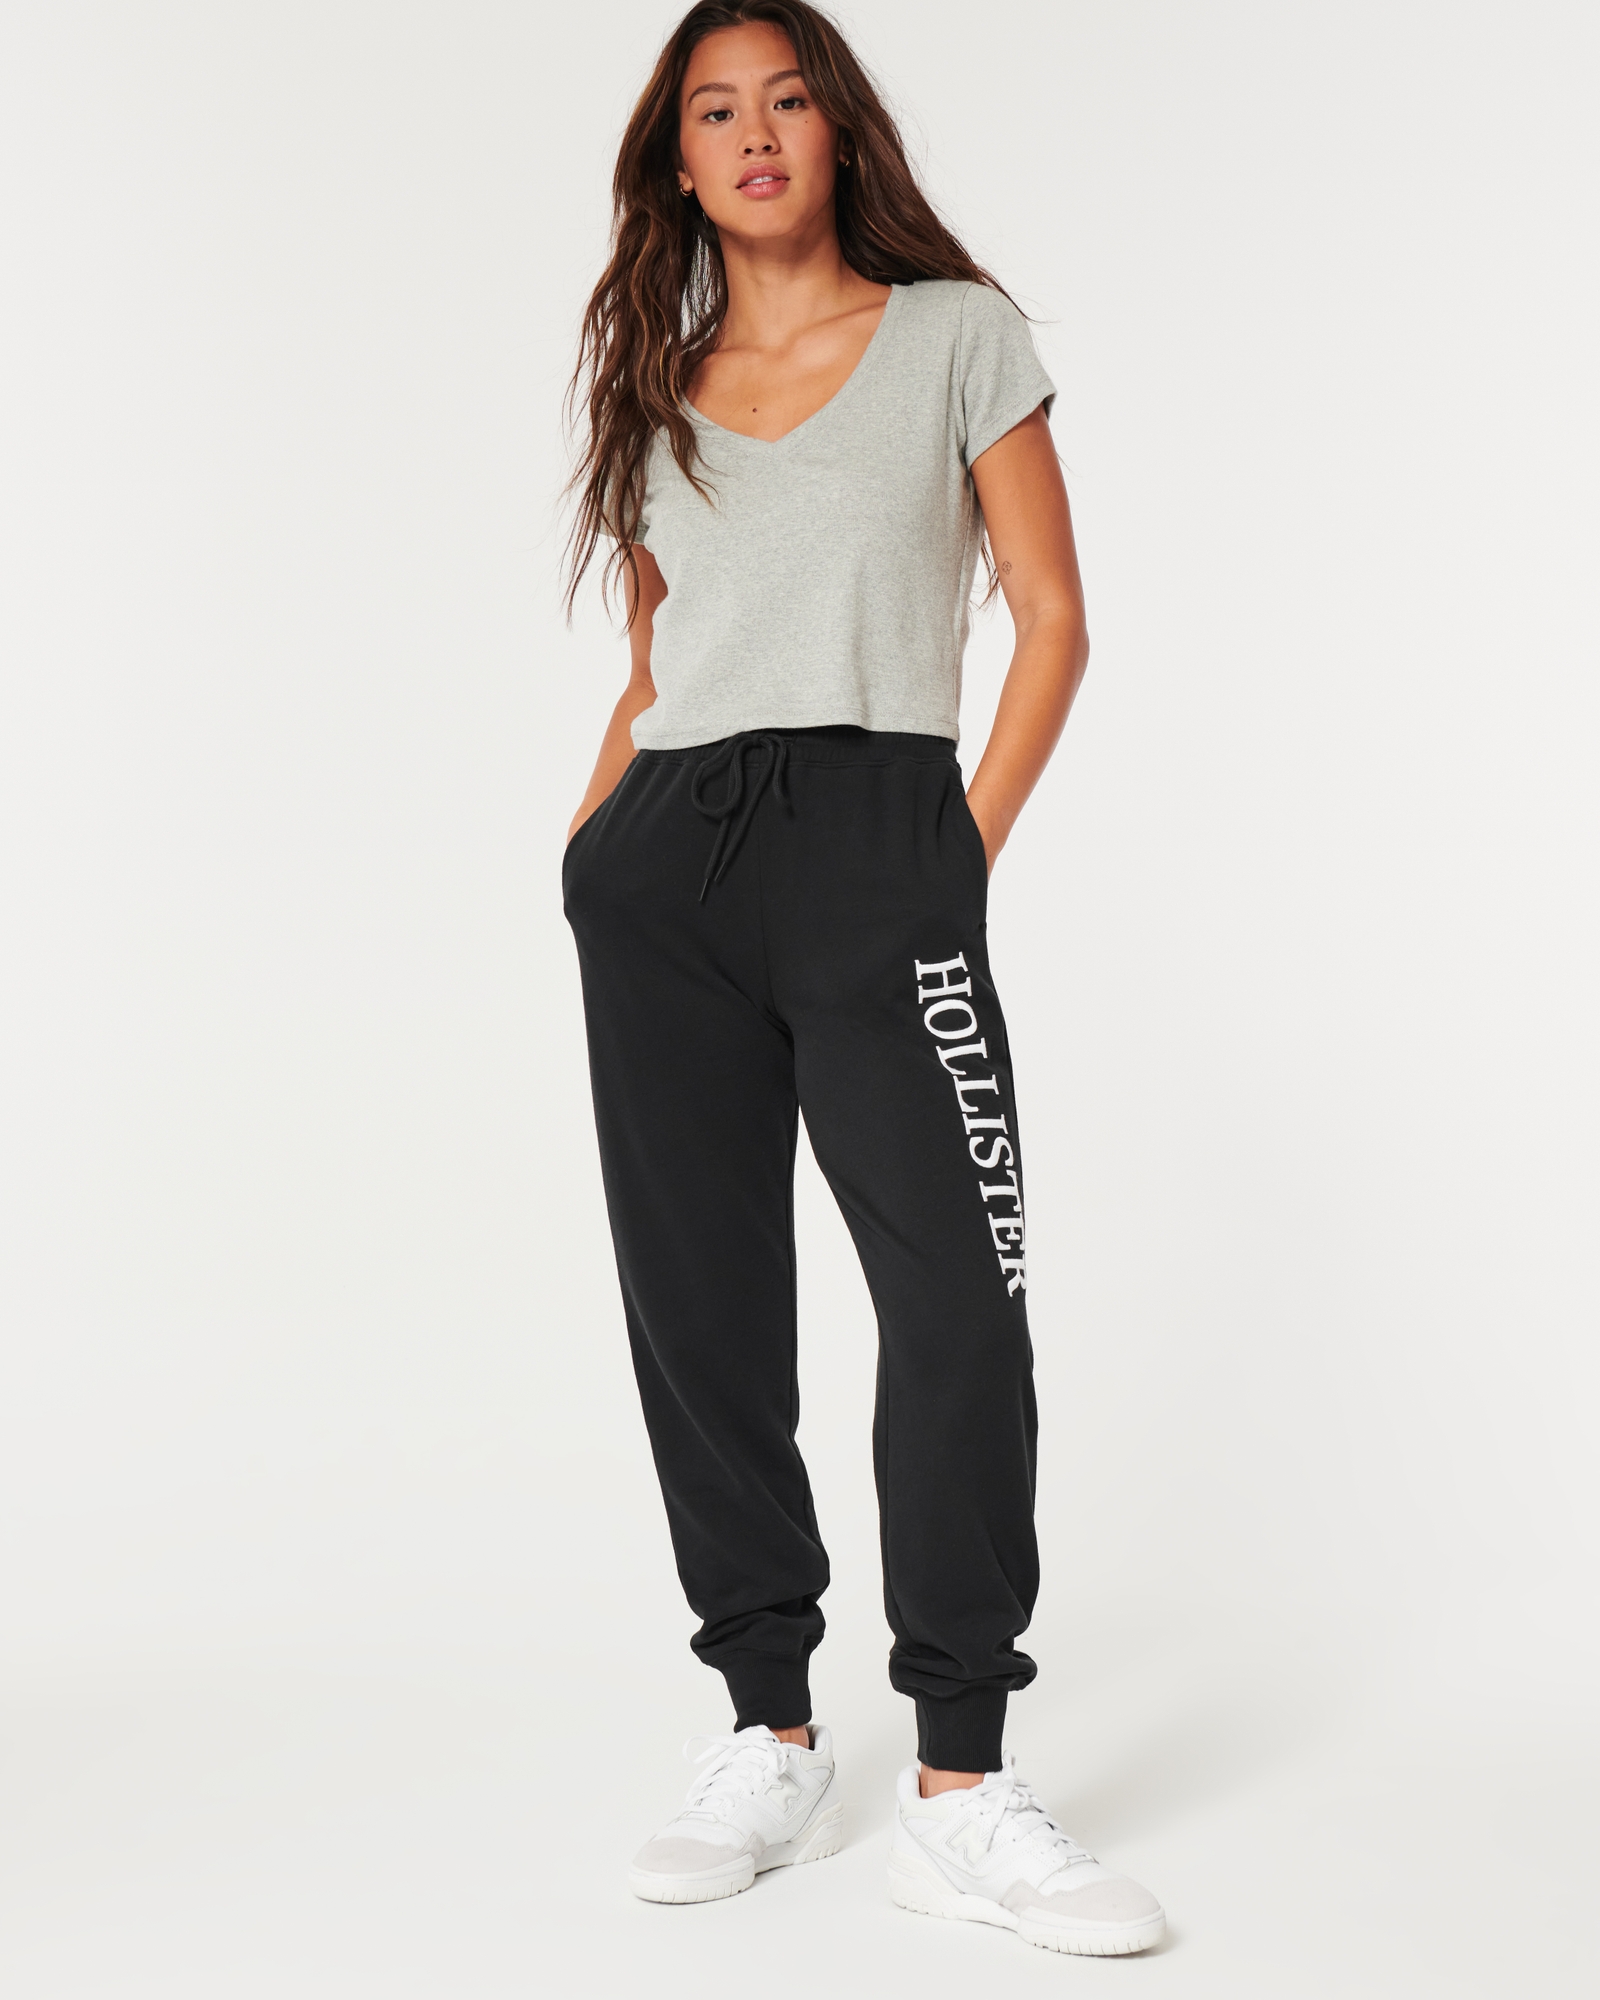 Women's Hollister Activewear from $30